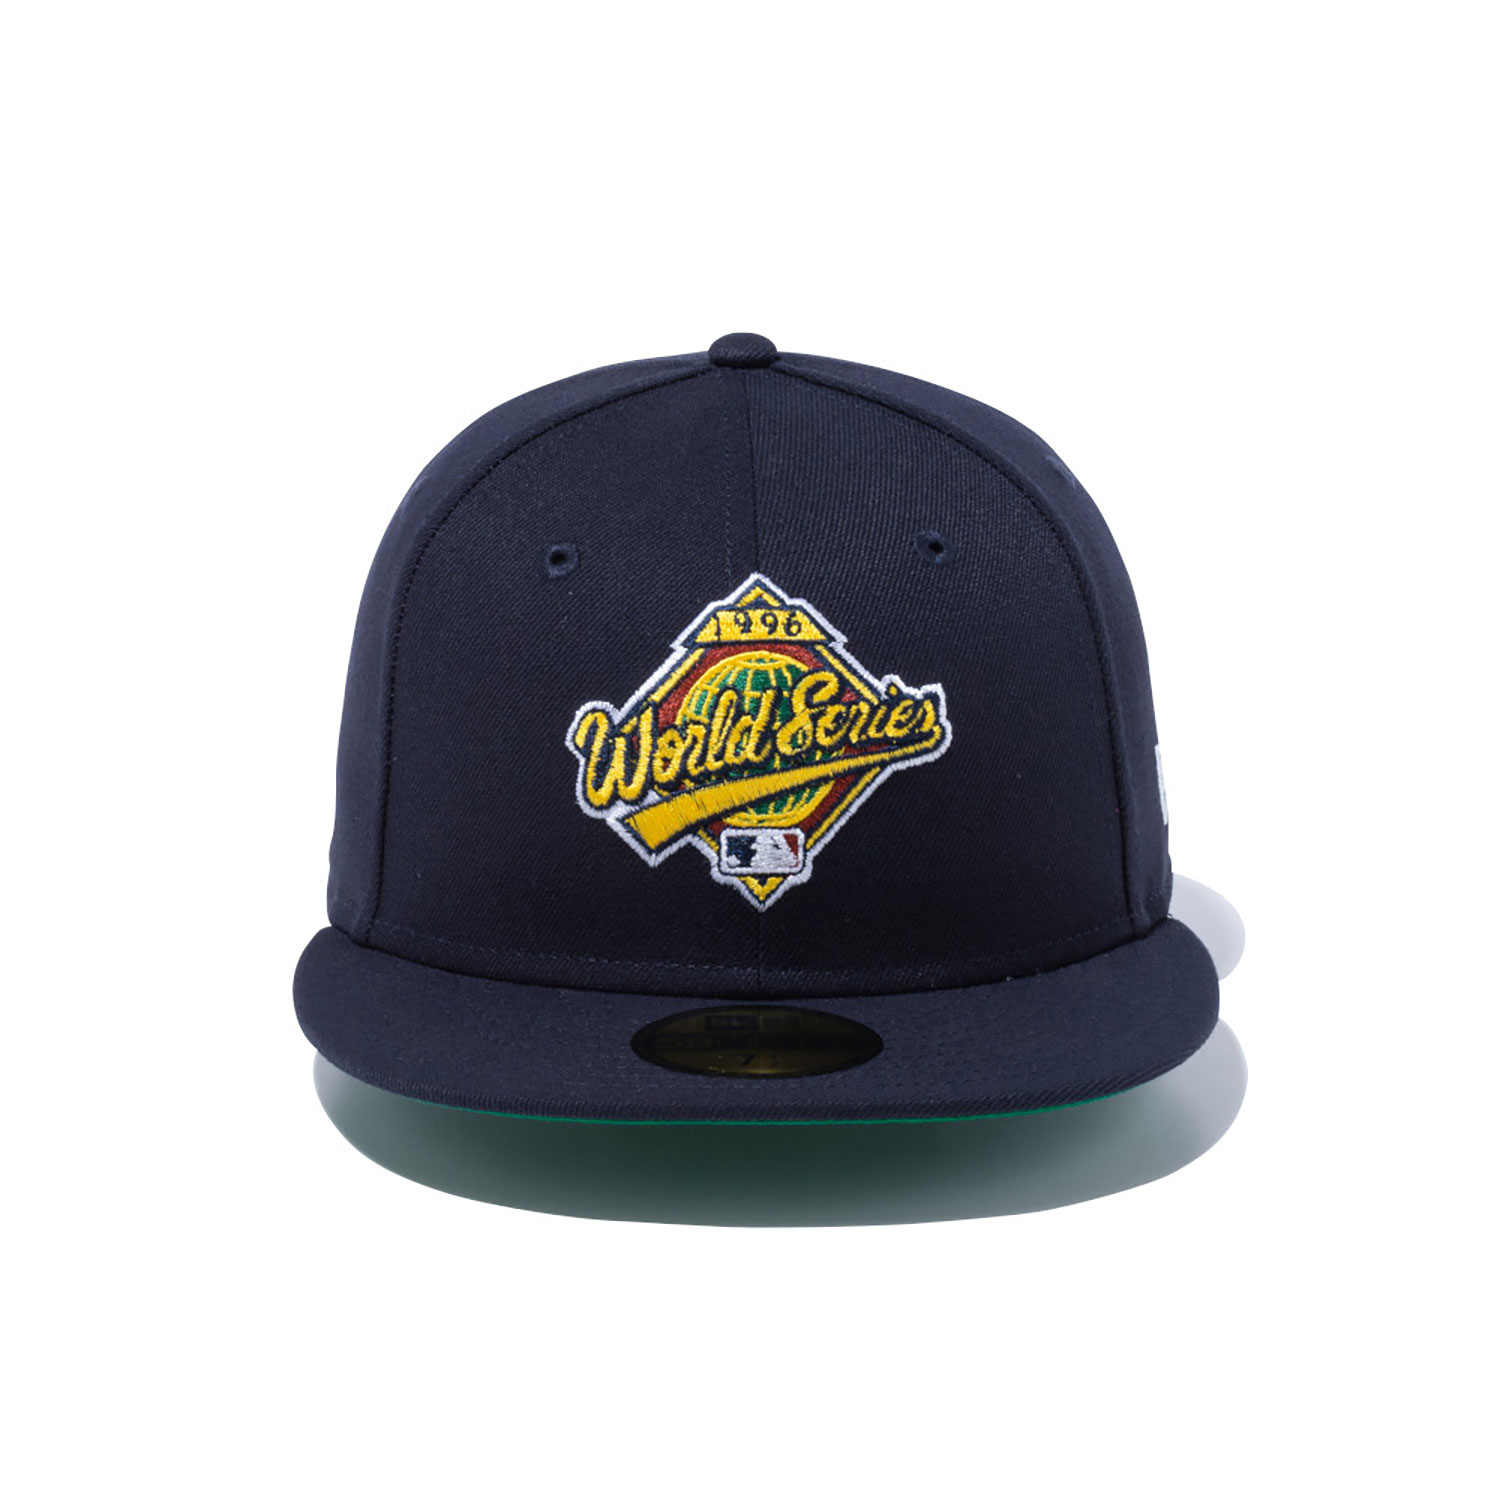 MLB World Series New Era Japan Navy 59FIFTY Fitted Cap